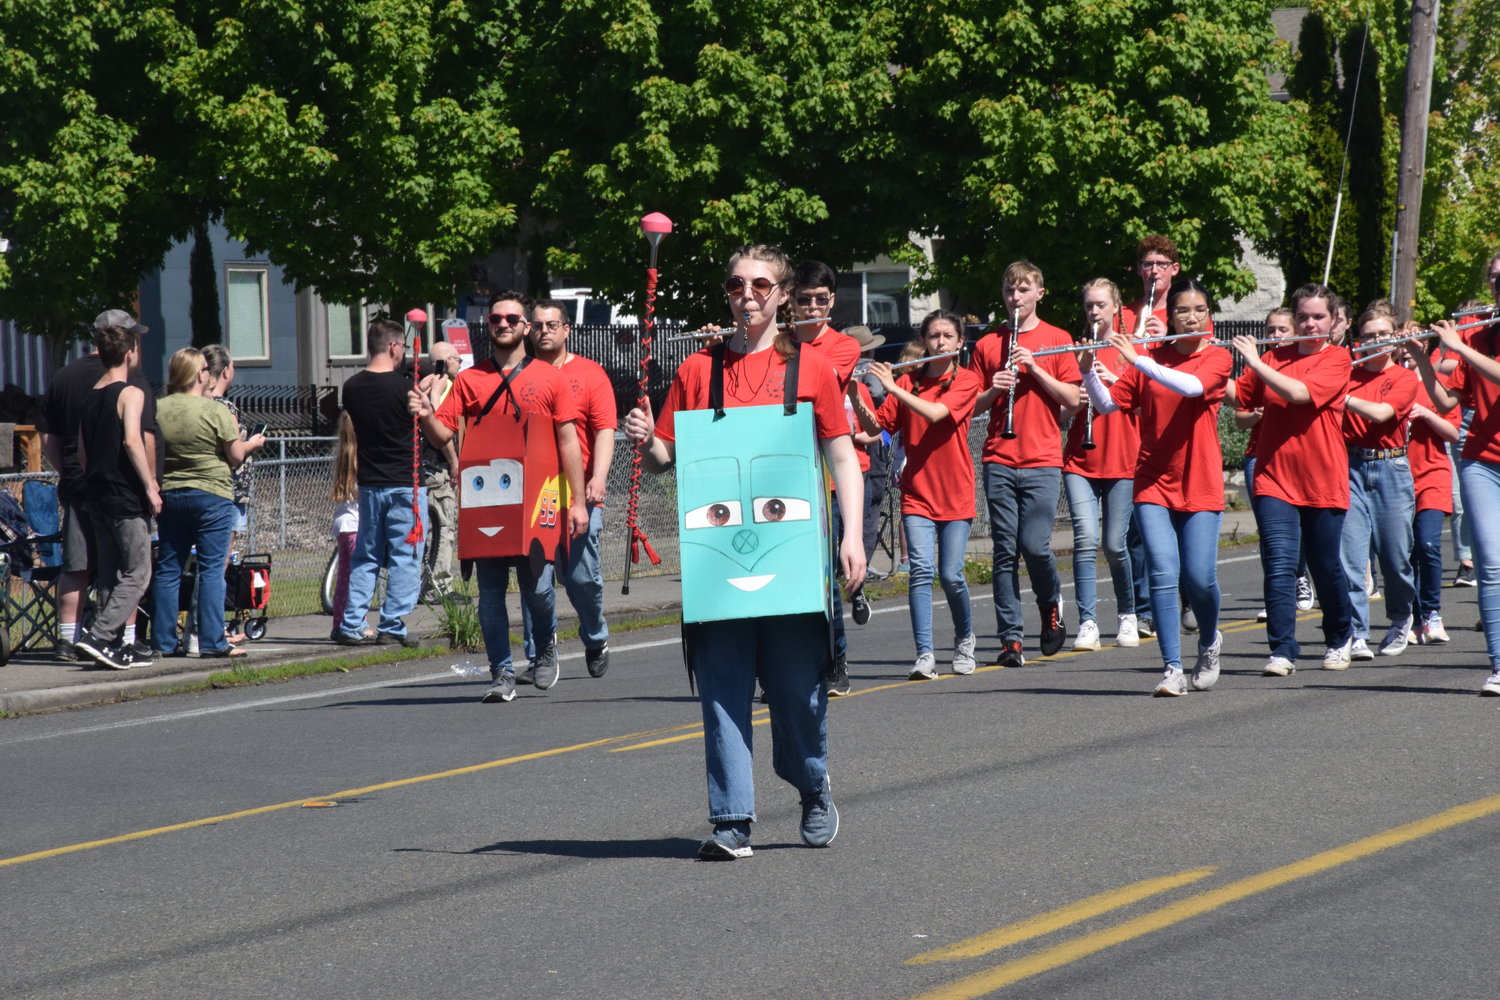 The Prairie High School marching band parades down Hazel Dell Avenue during the 2022 Parade of Bands on May 21.